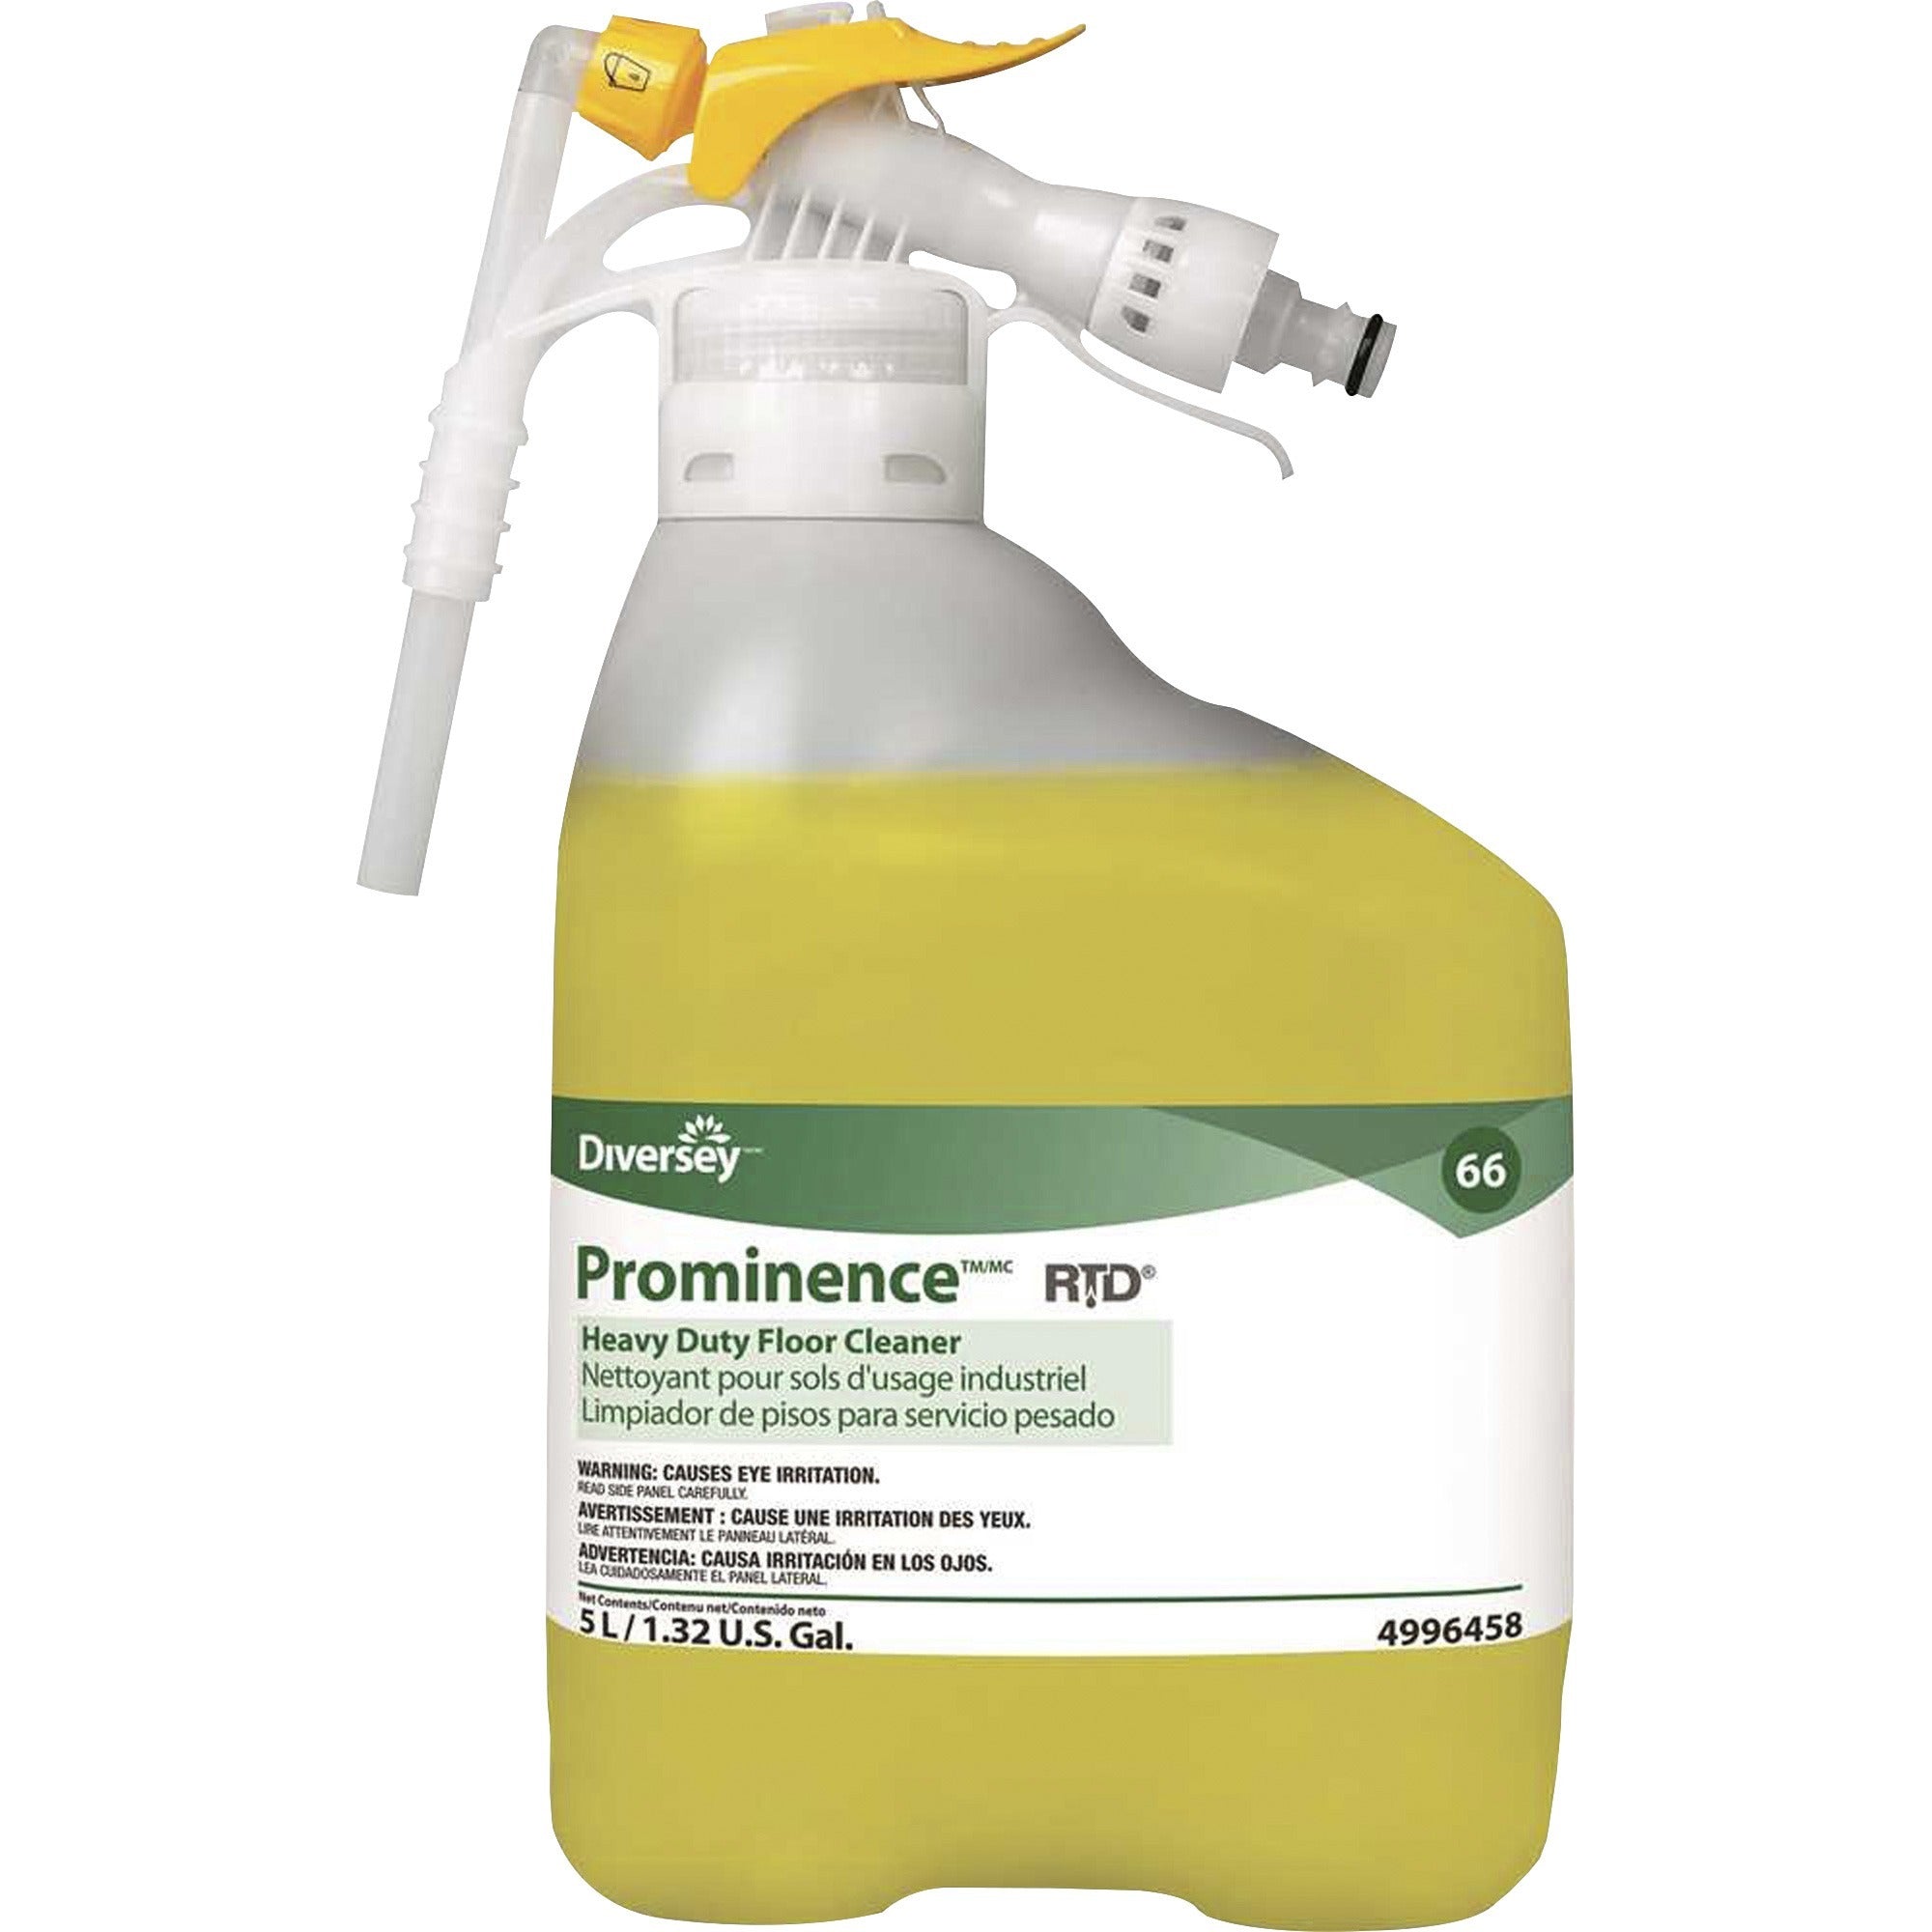 diversey-prominence-heavy-duty-floor-cleaner-concentrate-1691-fl-oz-53-quart-fruity-citrus-scent-1-each-heavy-duty-rinse-free-ph-neutral-dilutable-film-free-yellow_dvo94996458 - 1